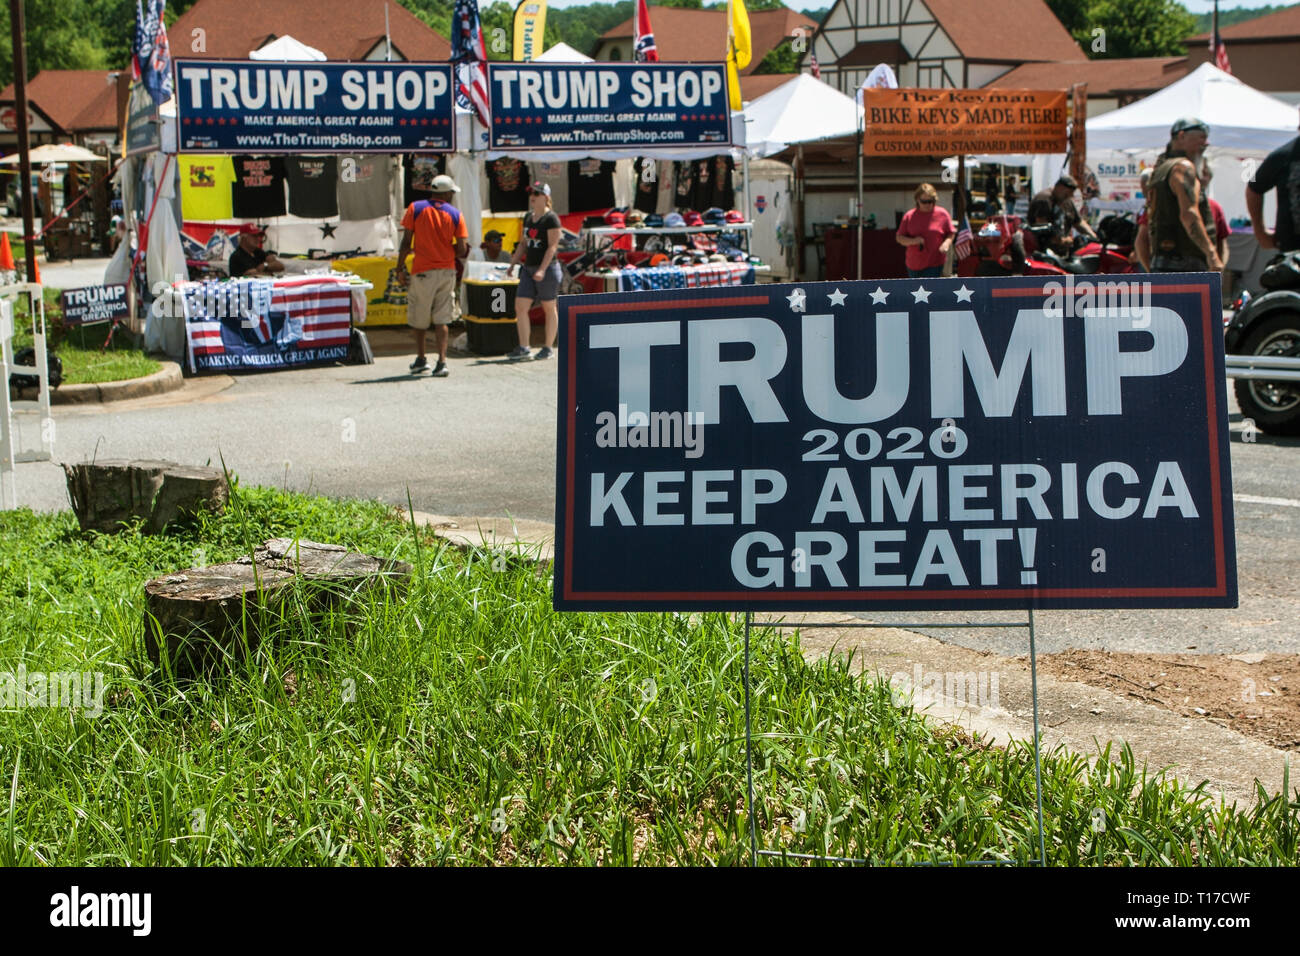 A Donald Trump 2020 presidential election campaign sign sits in the grass in front of the Trump Shop, a popup market in Helen, GA, on June 2, 2018. Stock Photo